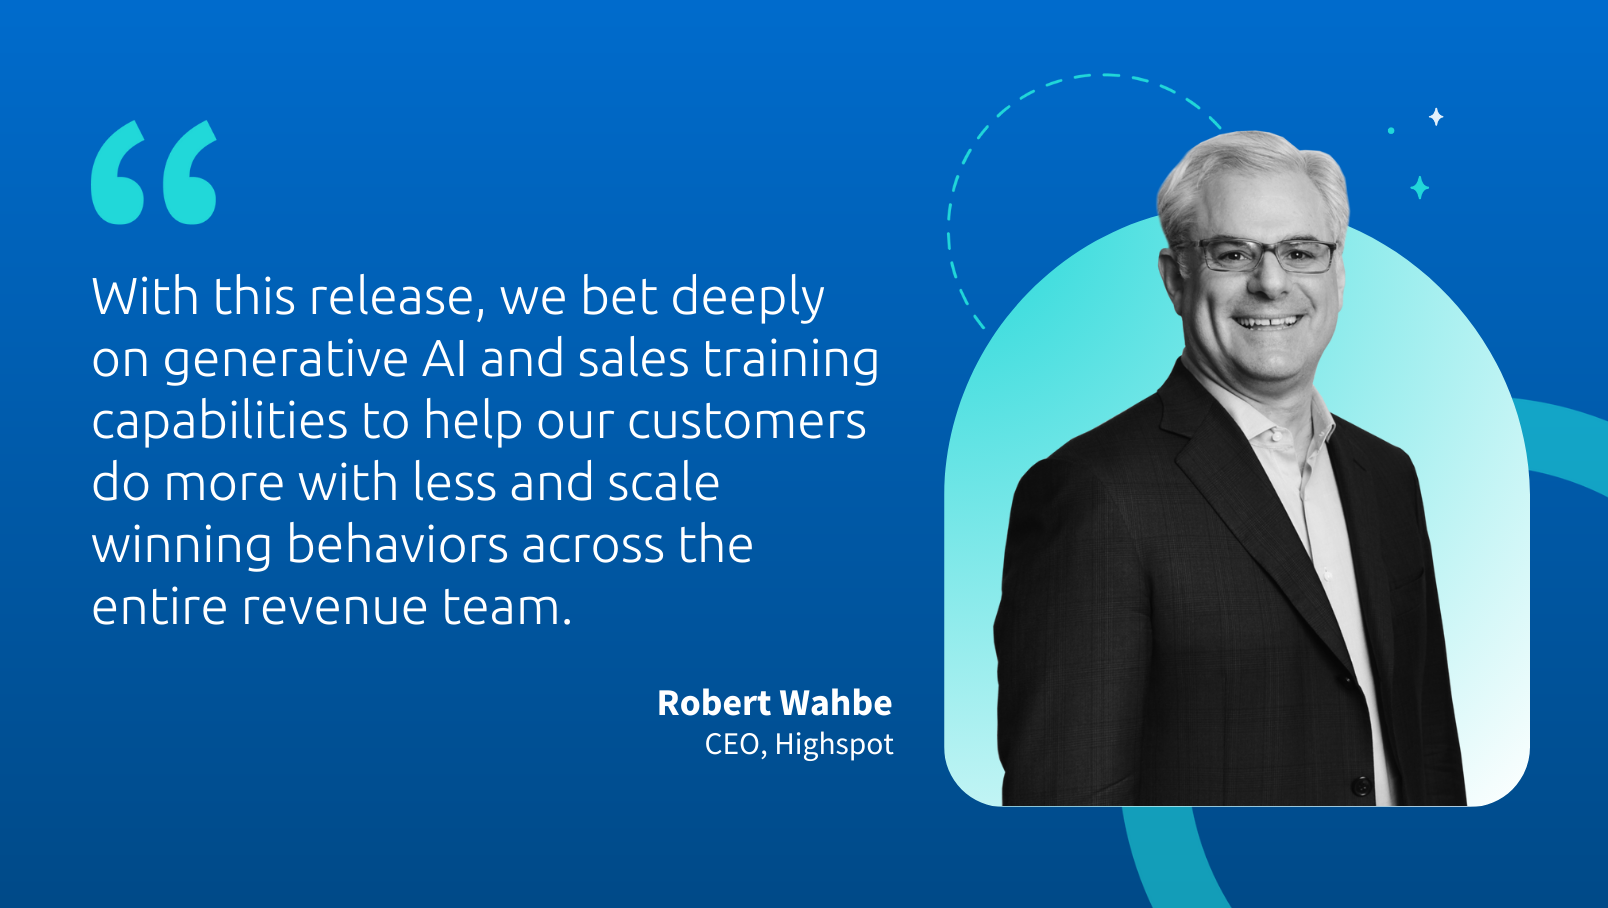 CEO Robert Wahbe speaks to Highspot's latest product release.